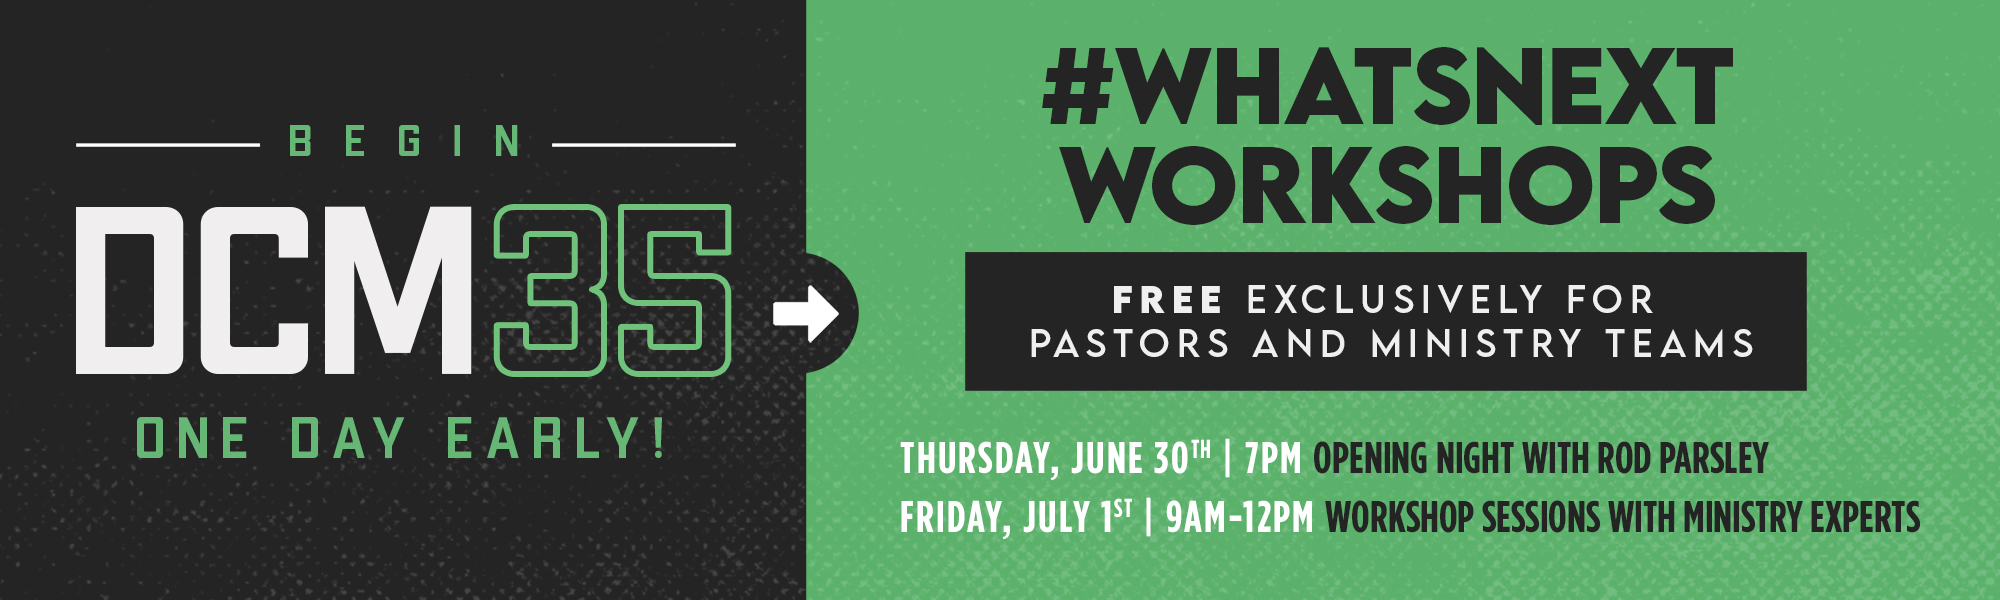 Begin DCM35 One Day Early! #WhatsNextWorkshop Free Exclusively for Pastors and Ministry Teams Thursday, June 30th 7pm Opening Night with Dr. Rod Parsley Friday, July 1st 9am-12pm Workshop Sessions with Ministry Experts